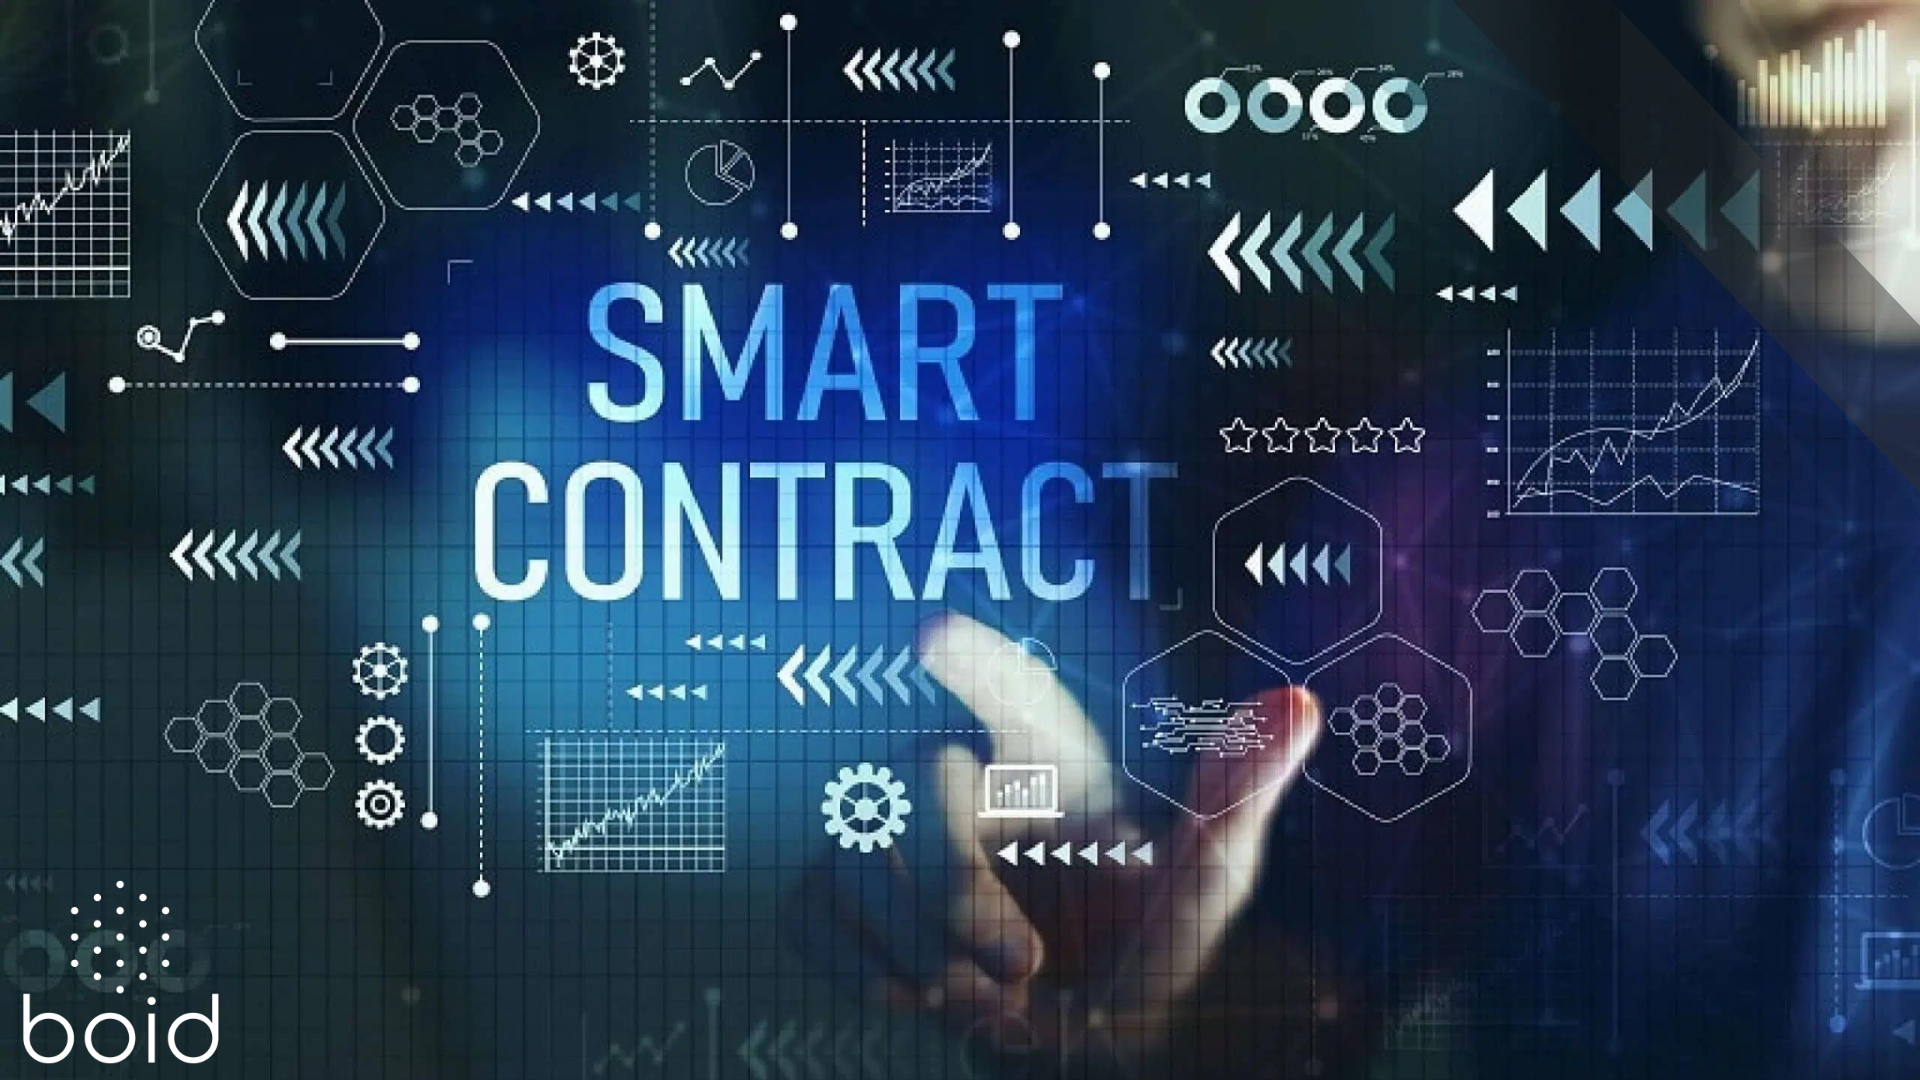 What are smart contracts and their benefits?